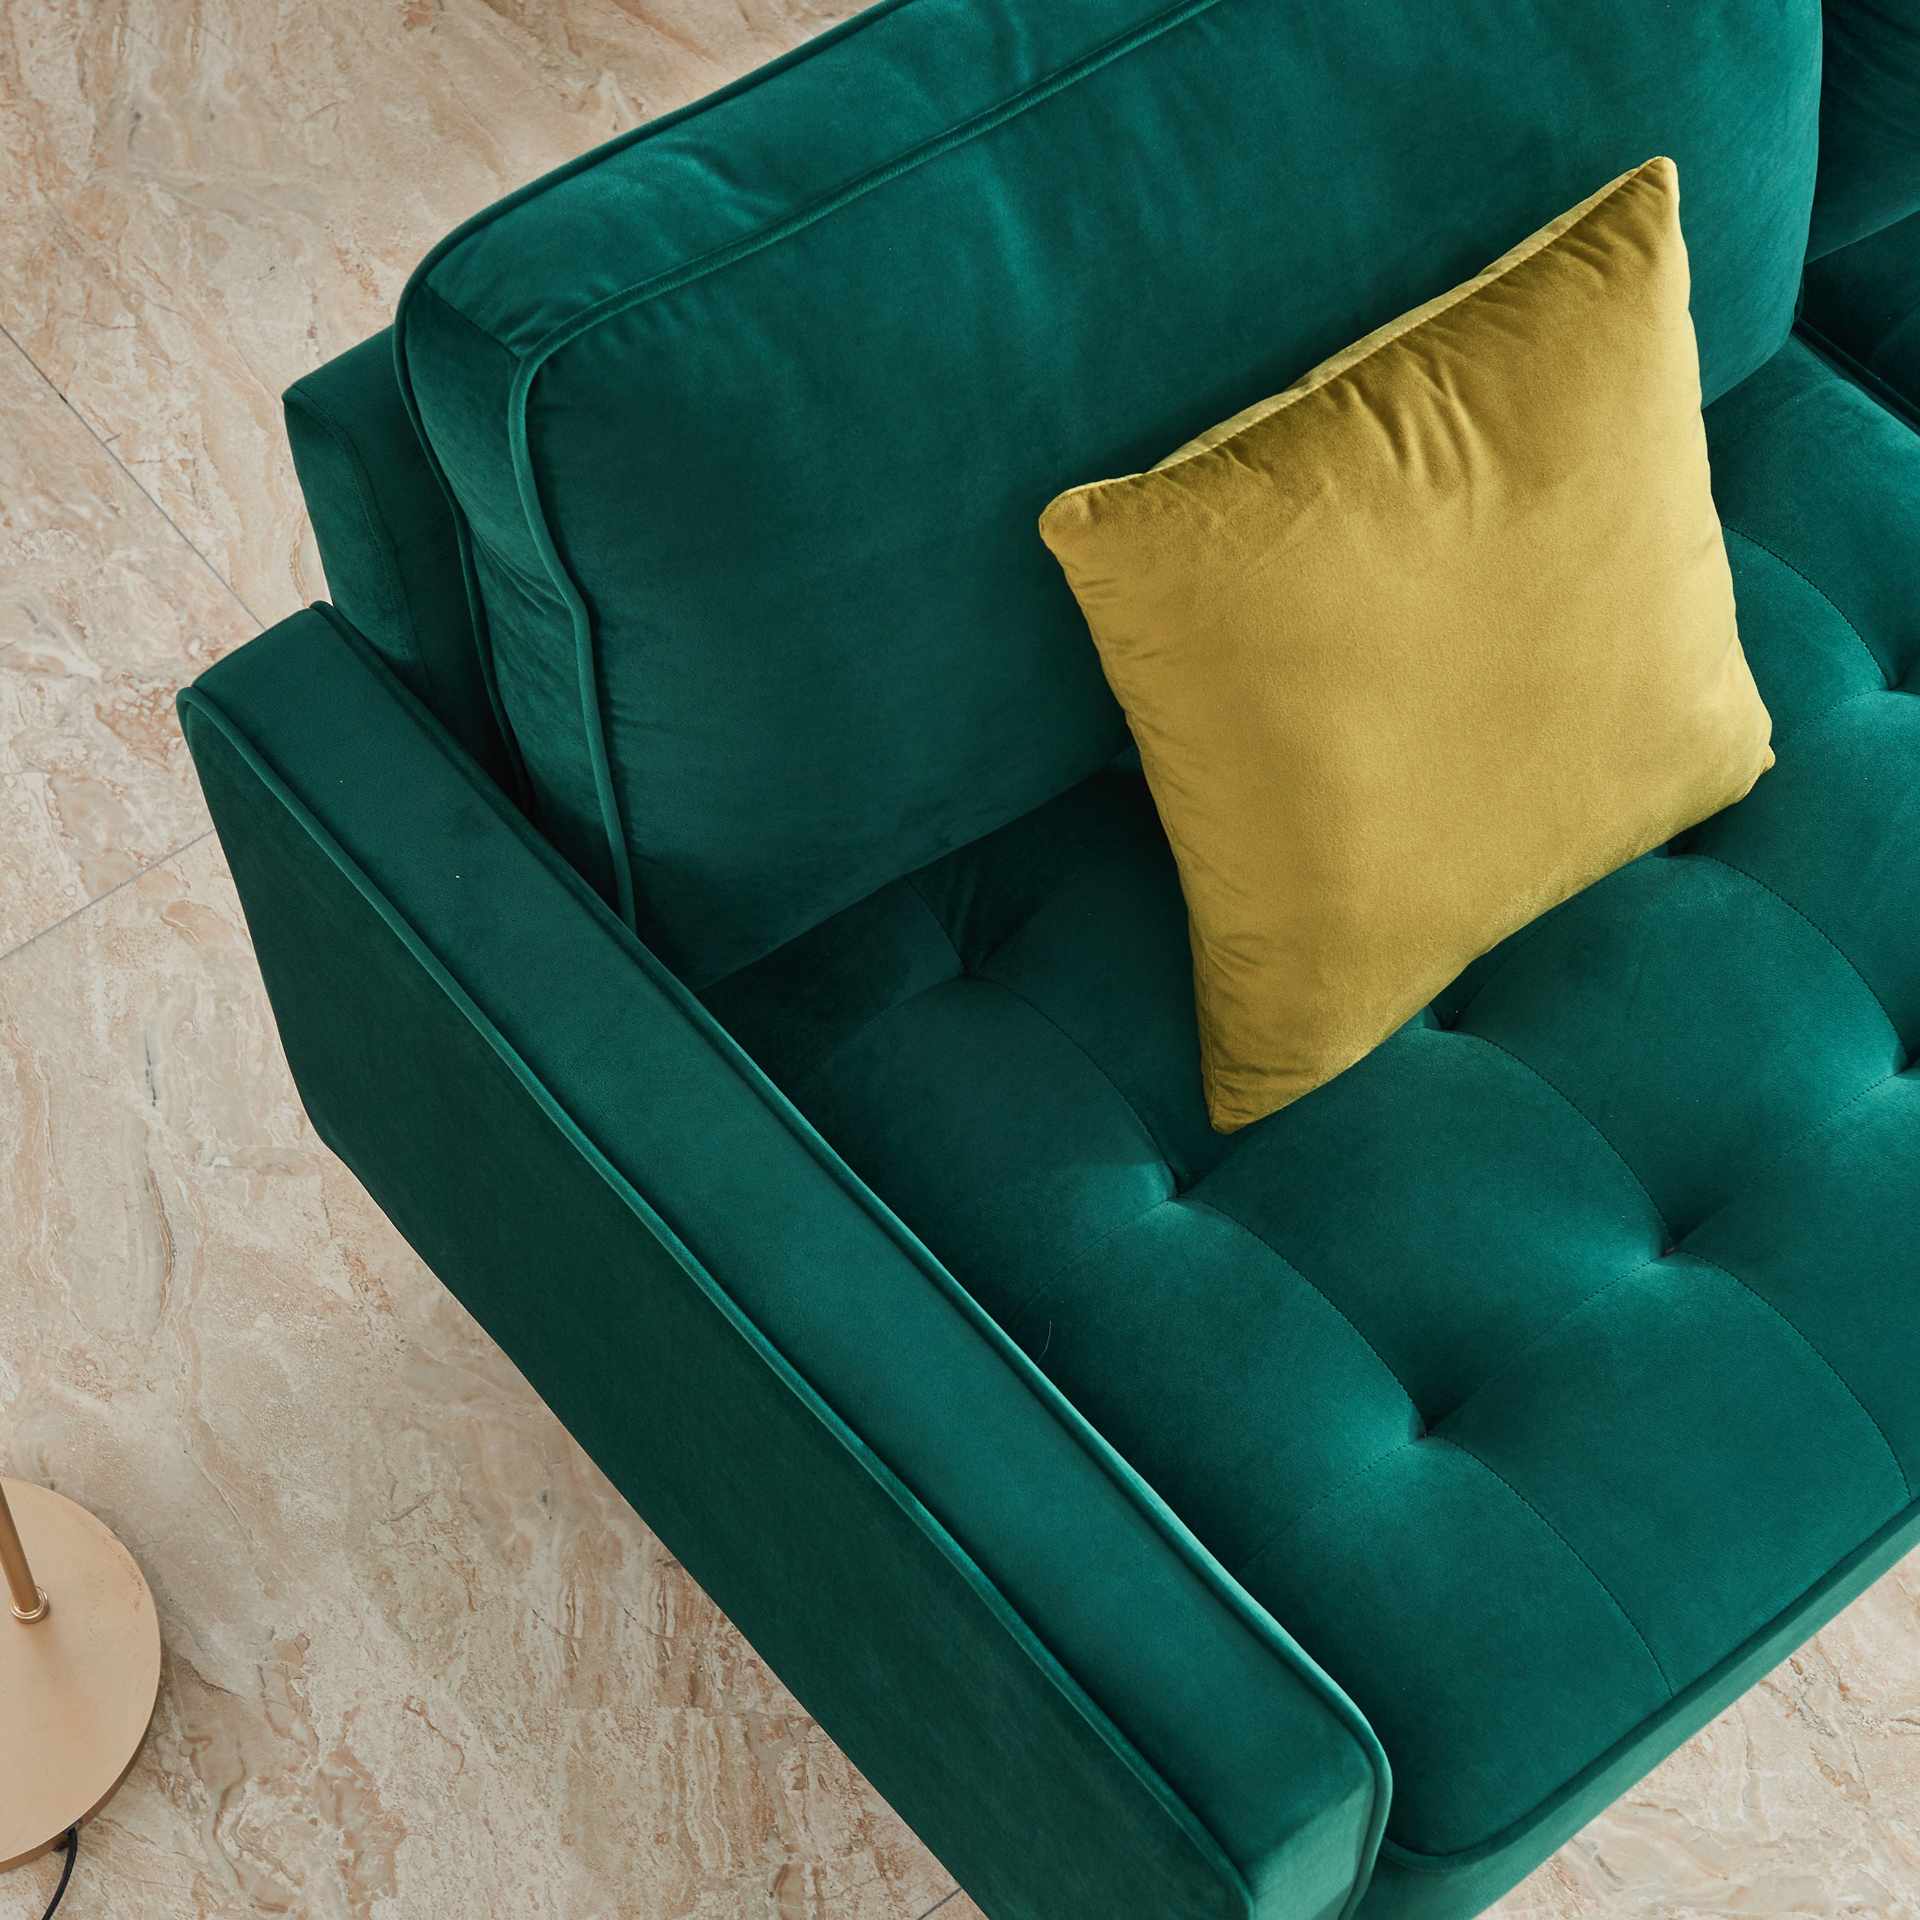 Emerald - Luxury Velvet Button Tufted Style Sofa With (2) Decorative Pillows